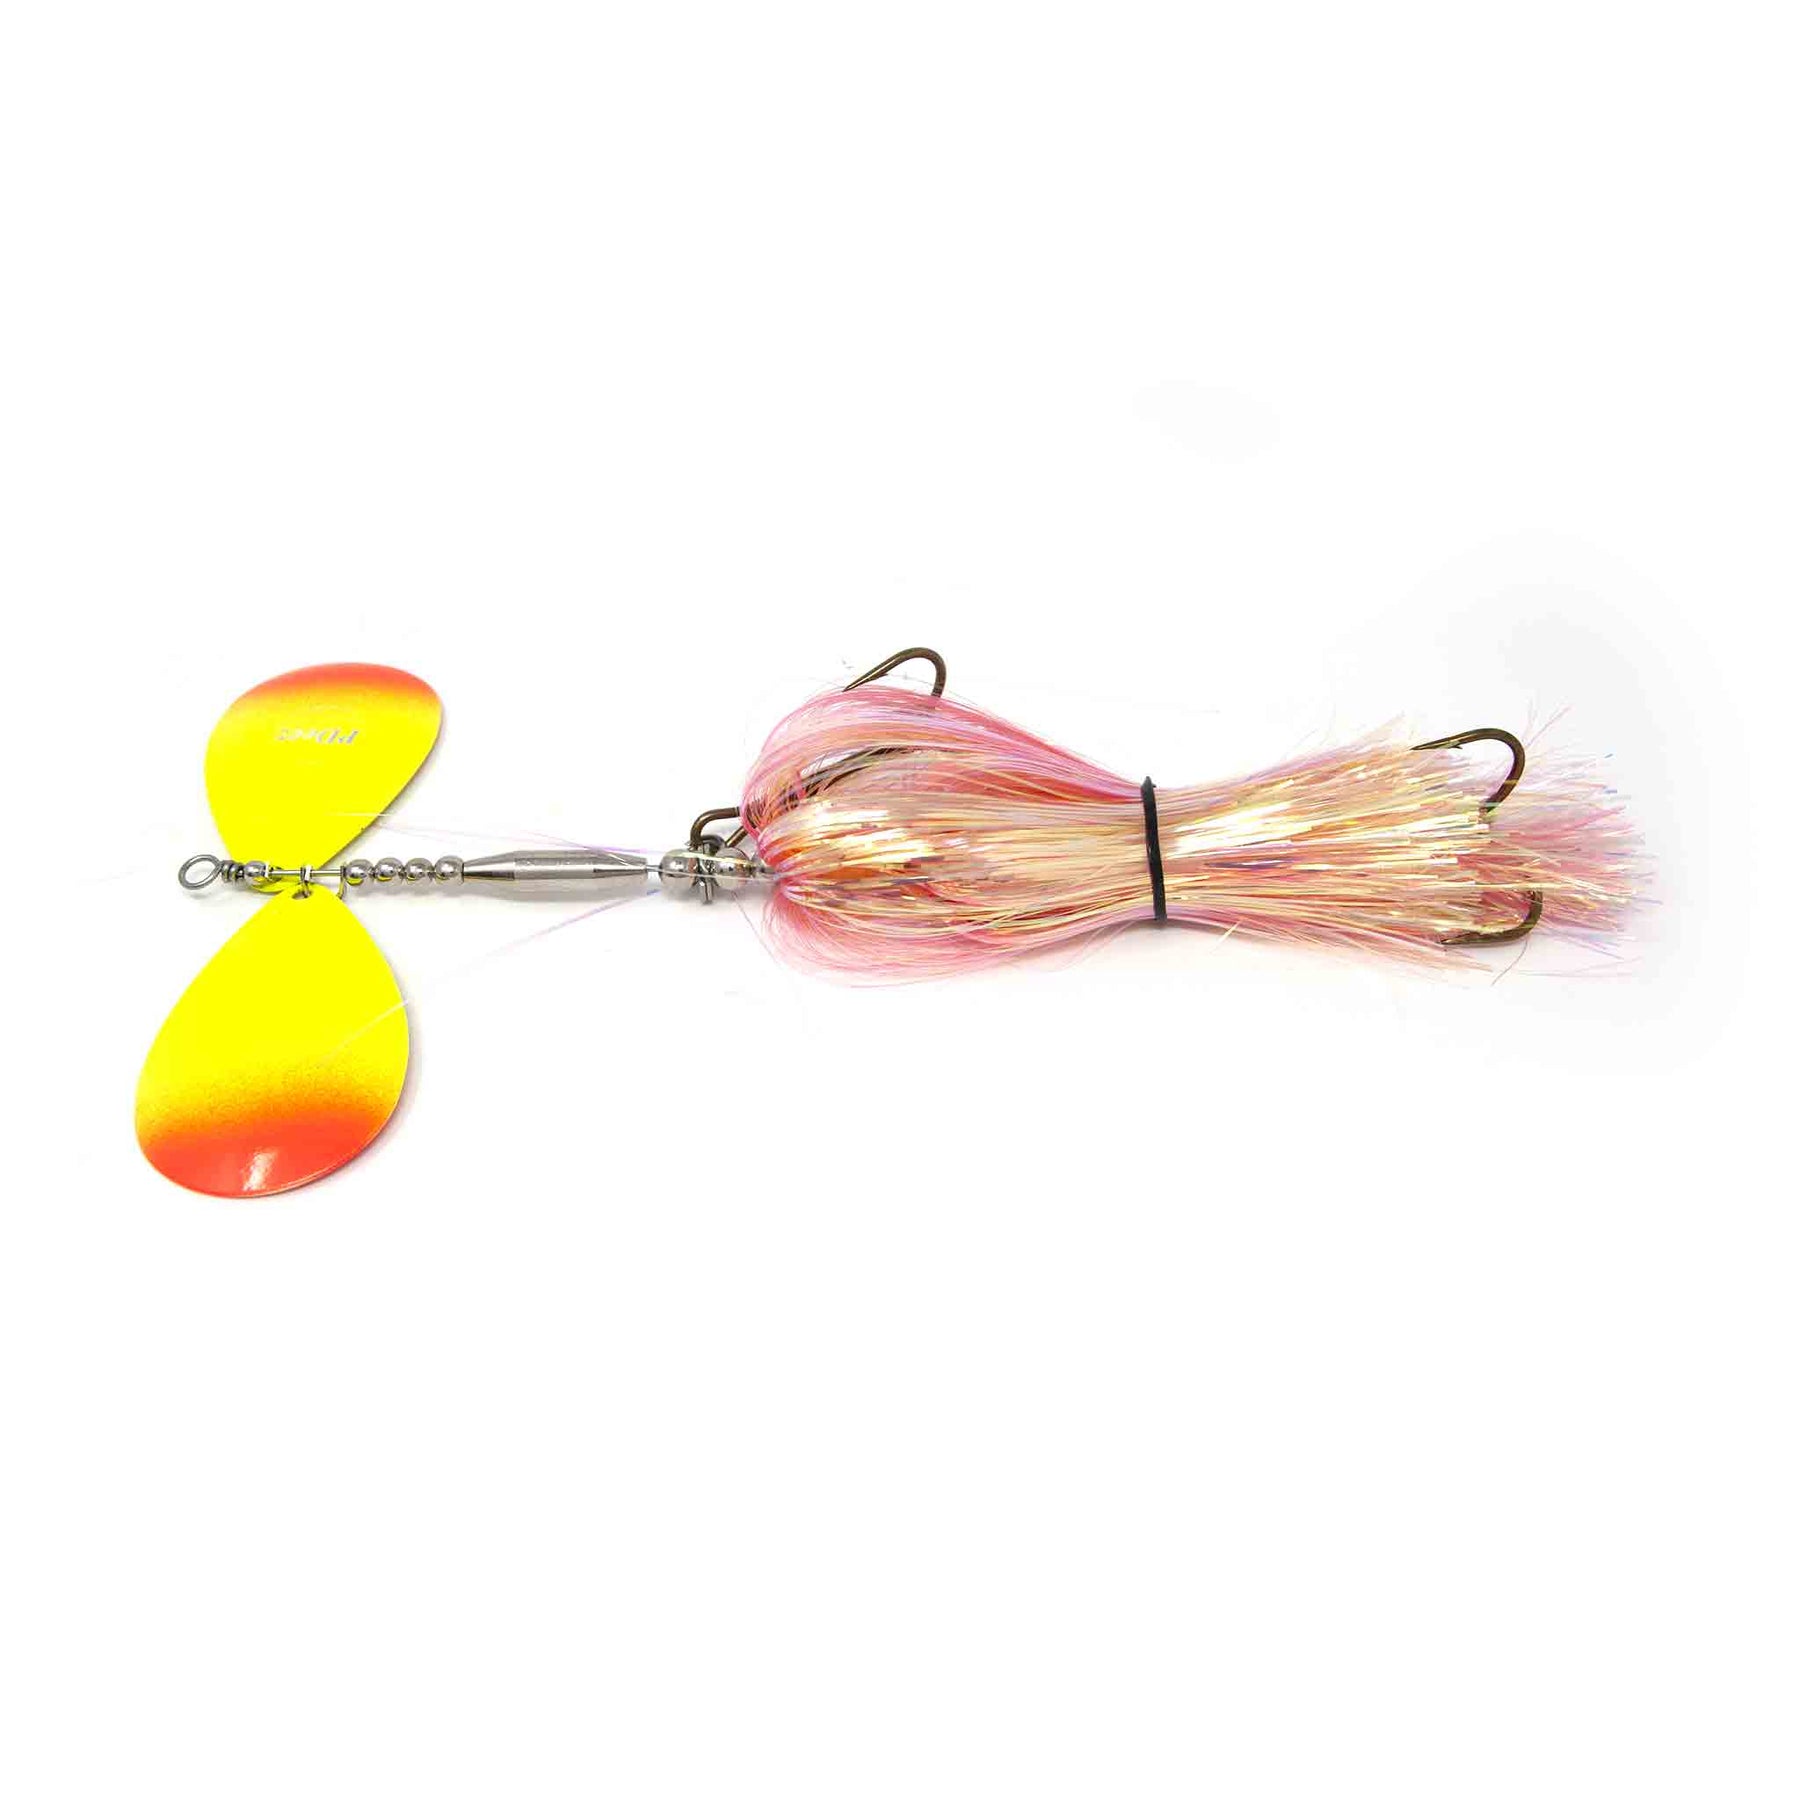 View of Bucktails PDeez Big Tens (10/10) Bucktail Penny Wise available at EZOKO Pike and Musky Shop